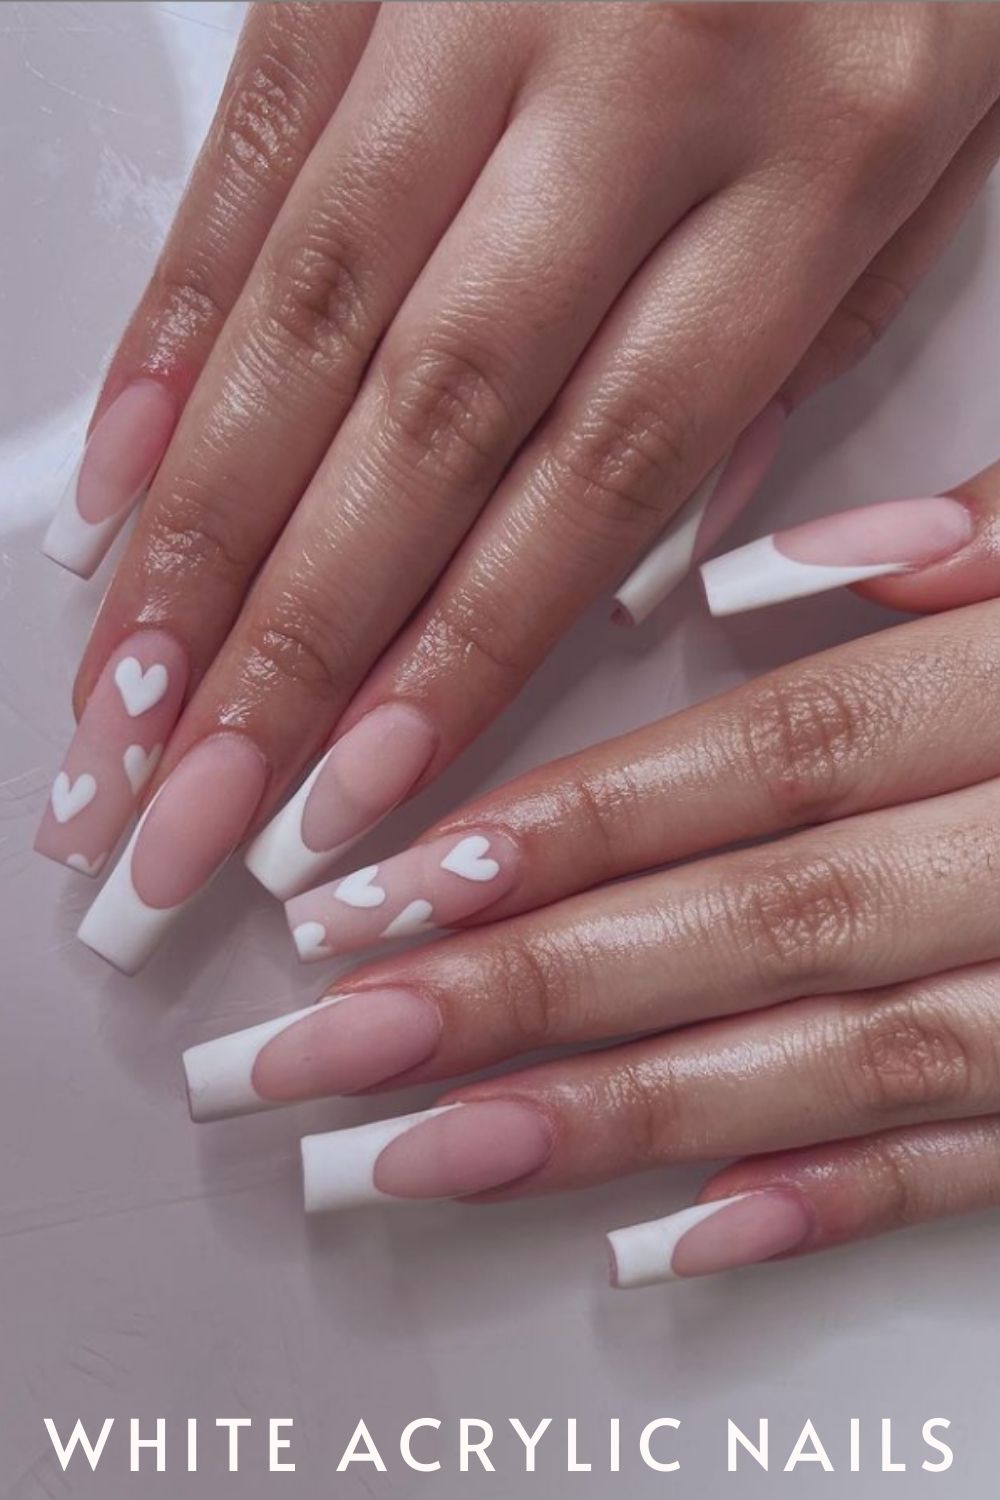 Cute white nail designs with lovely heart